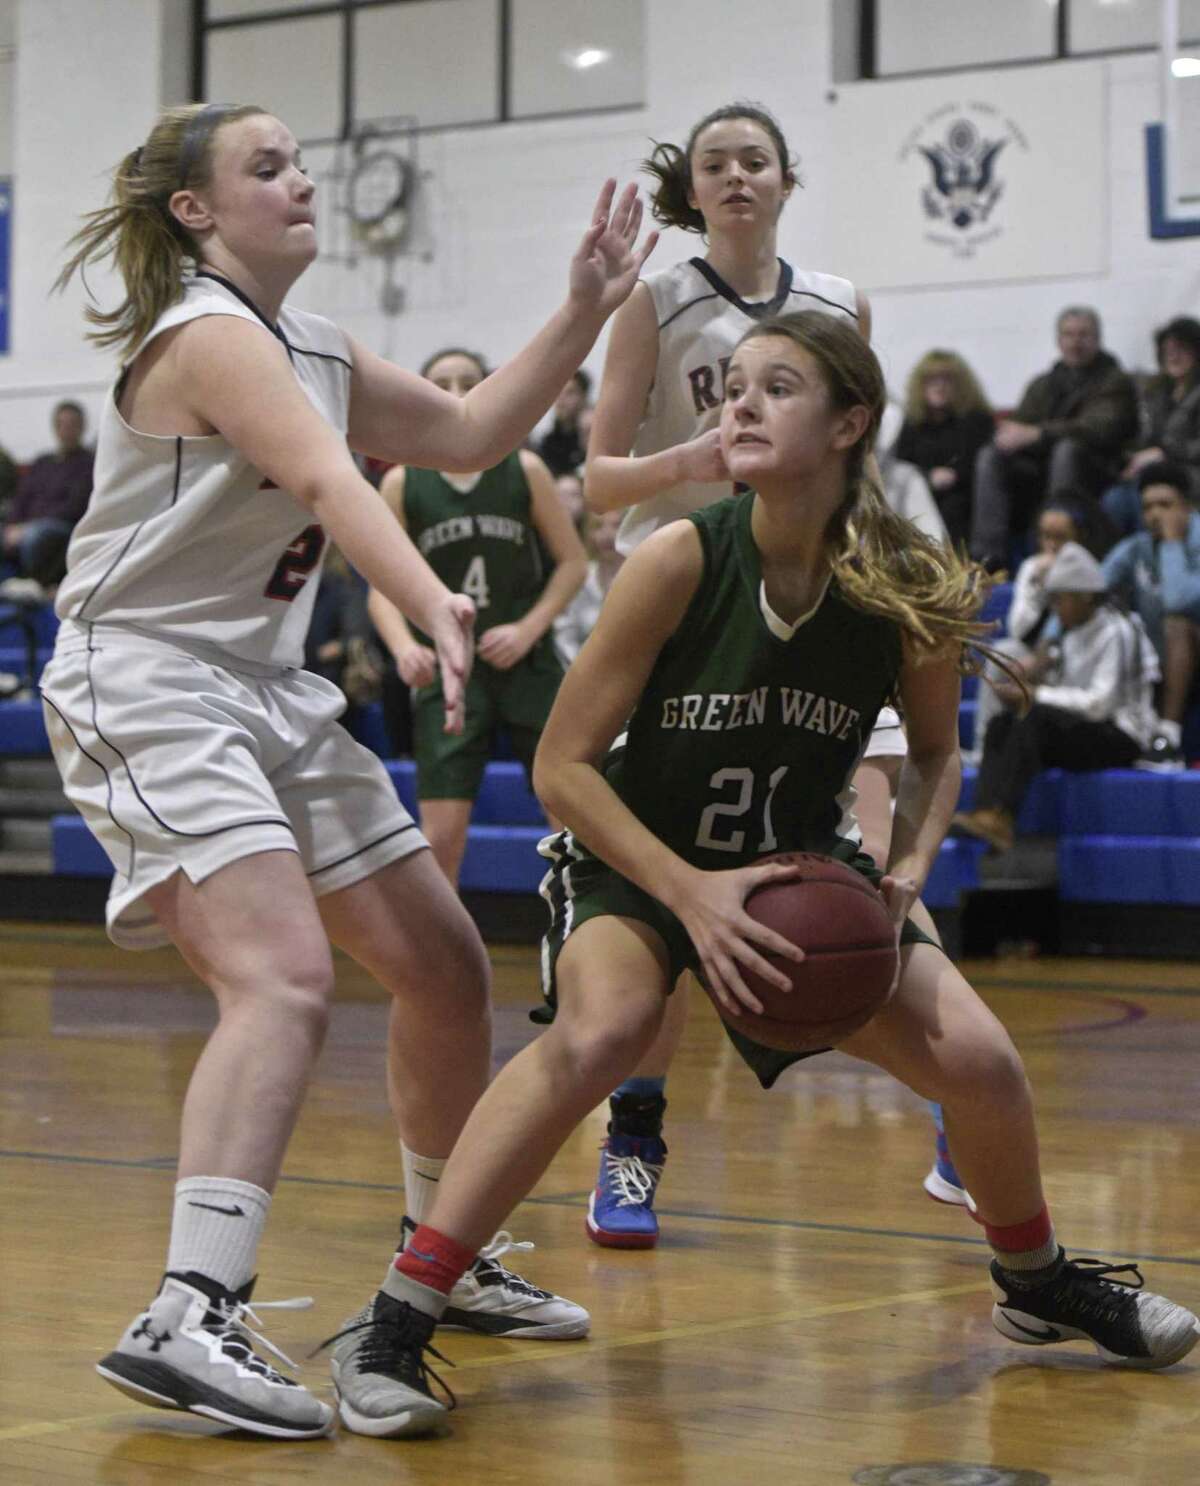 New Milford's Gillian Boss (21), a junior transfer from Florida, is averaging 20 points per game as the Green Wave have gotten off to a 5-1 start.